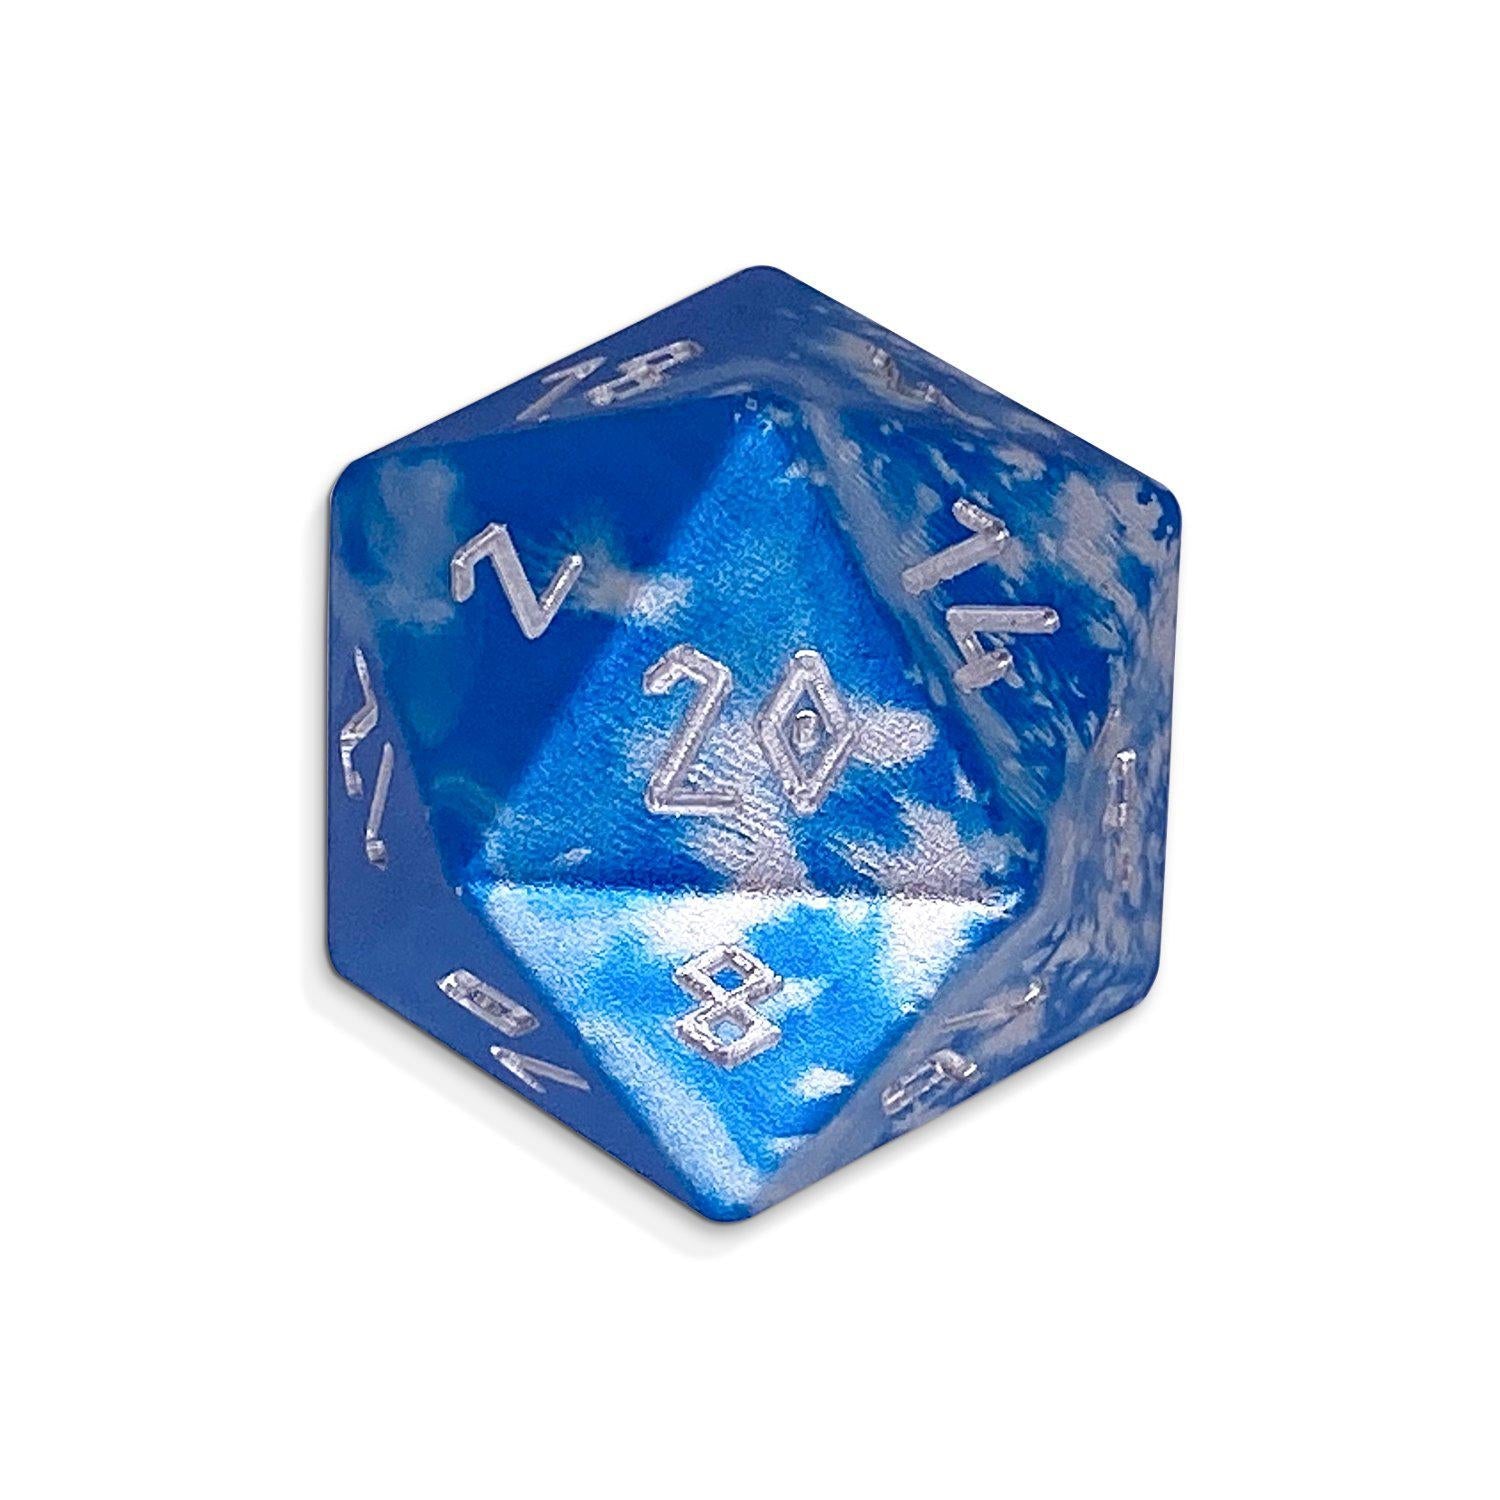 Single Wondrous Dice® D20 in Holy Smite! by Norse Foundry® 6063 Aircraft Grade Aluminum - NOR 02407